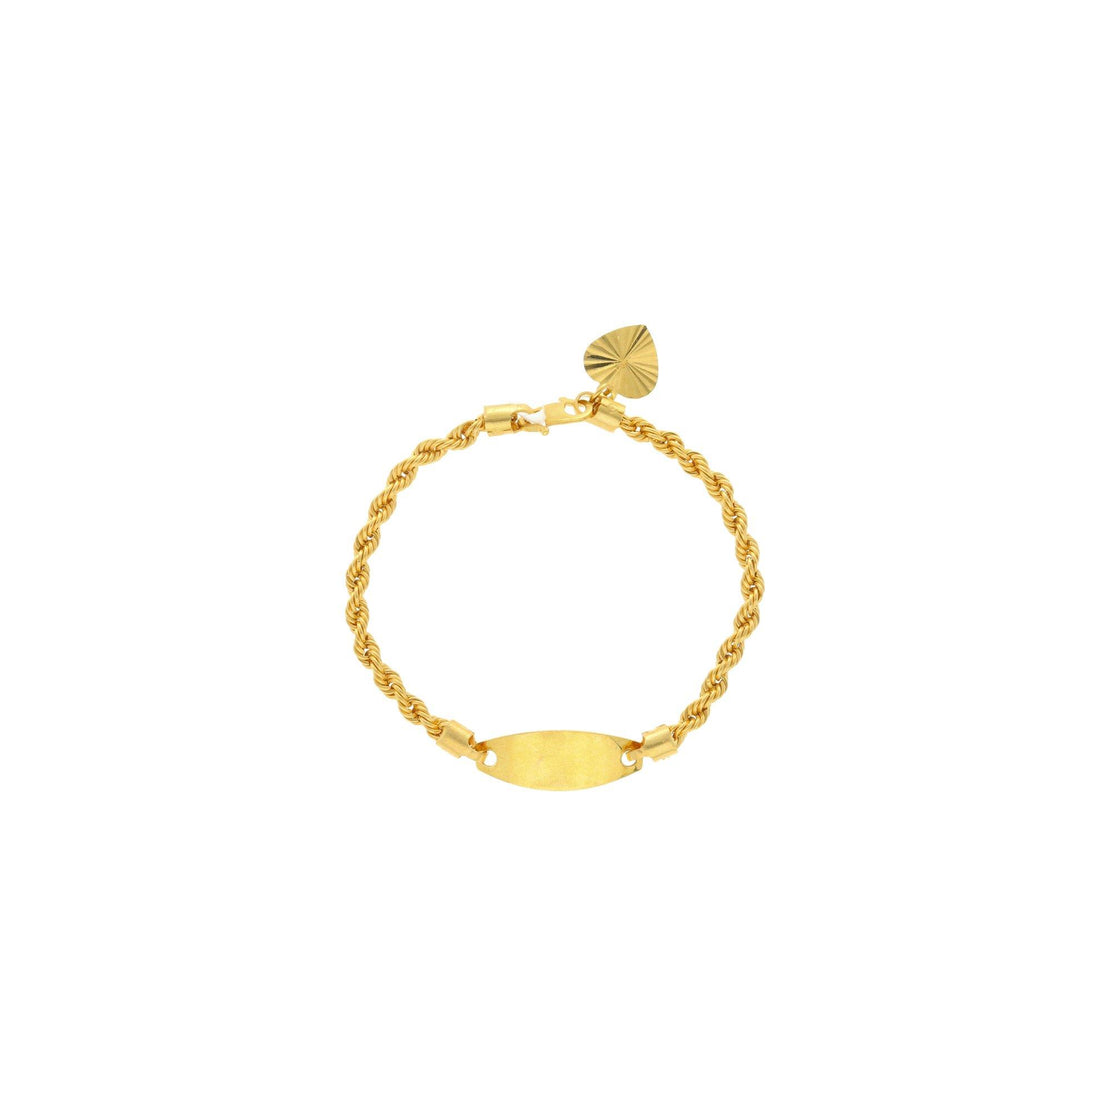 WOMAN'S BRACELET IN IP GOLD STEEL WITH WHITE STONES | Luca Barra